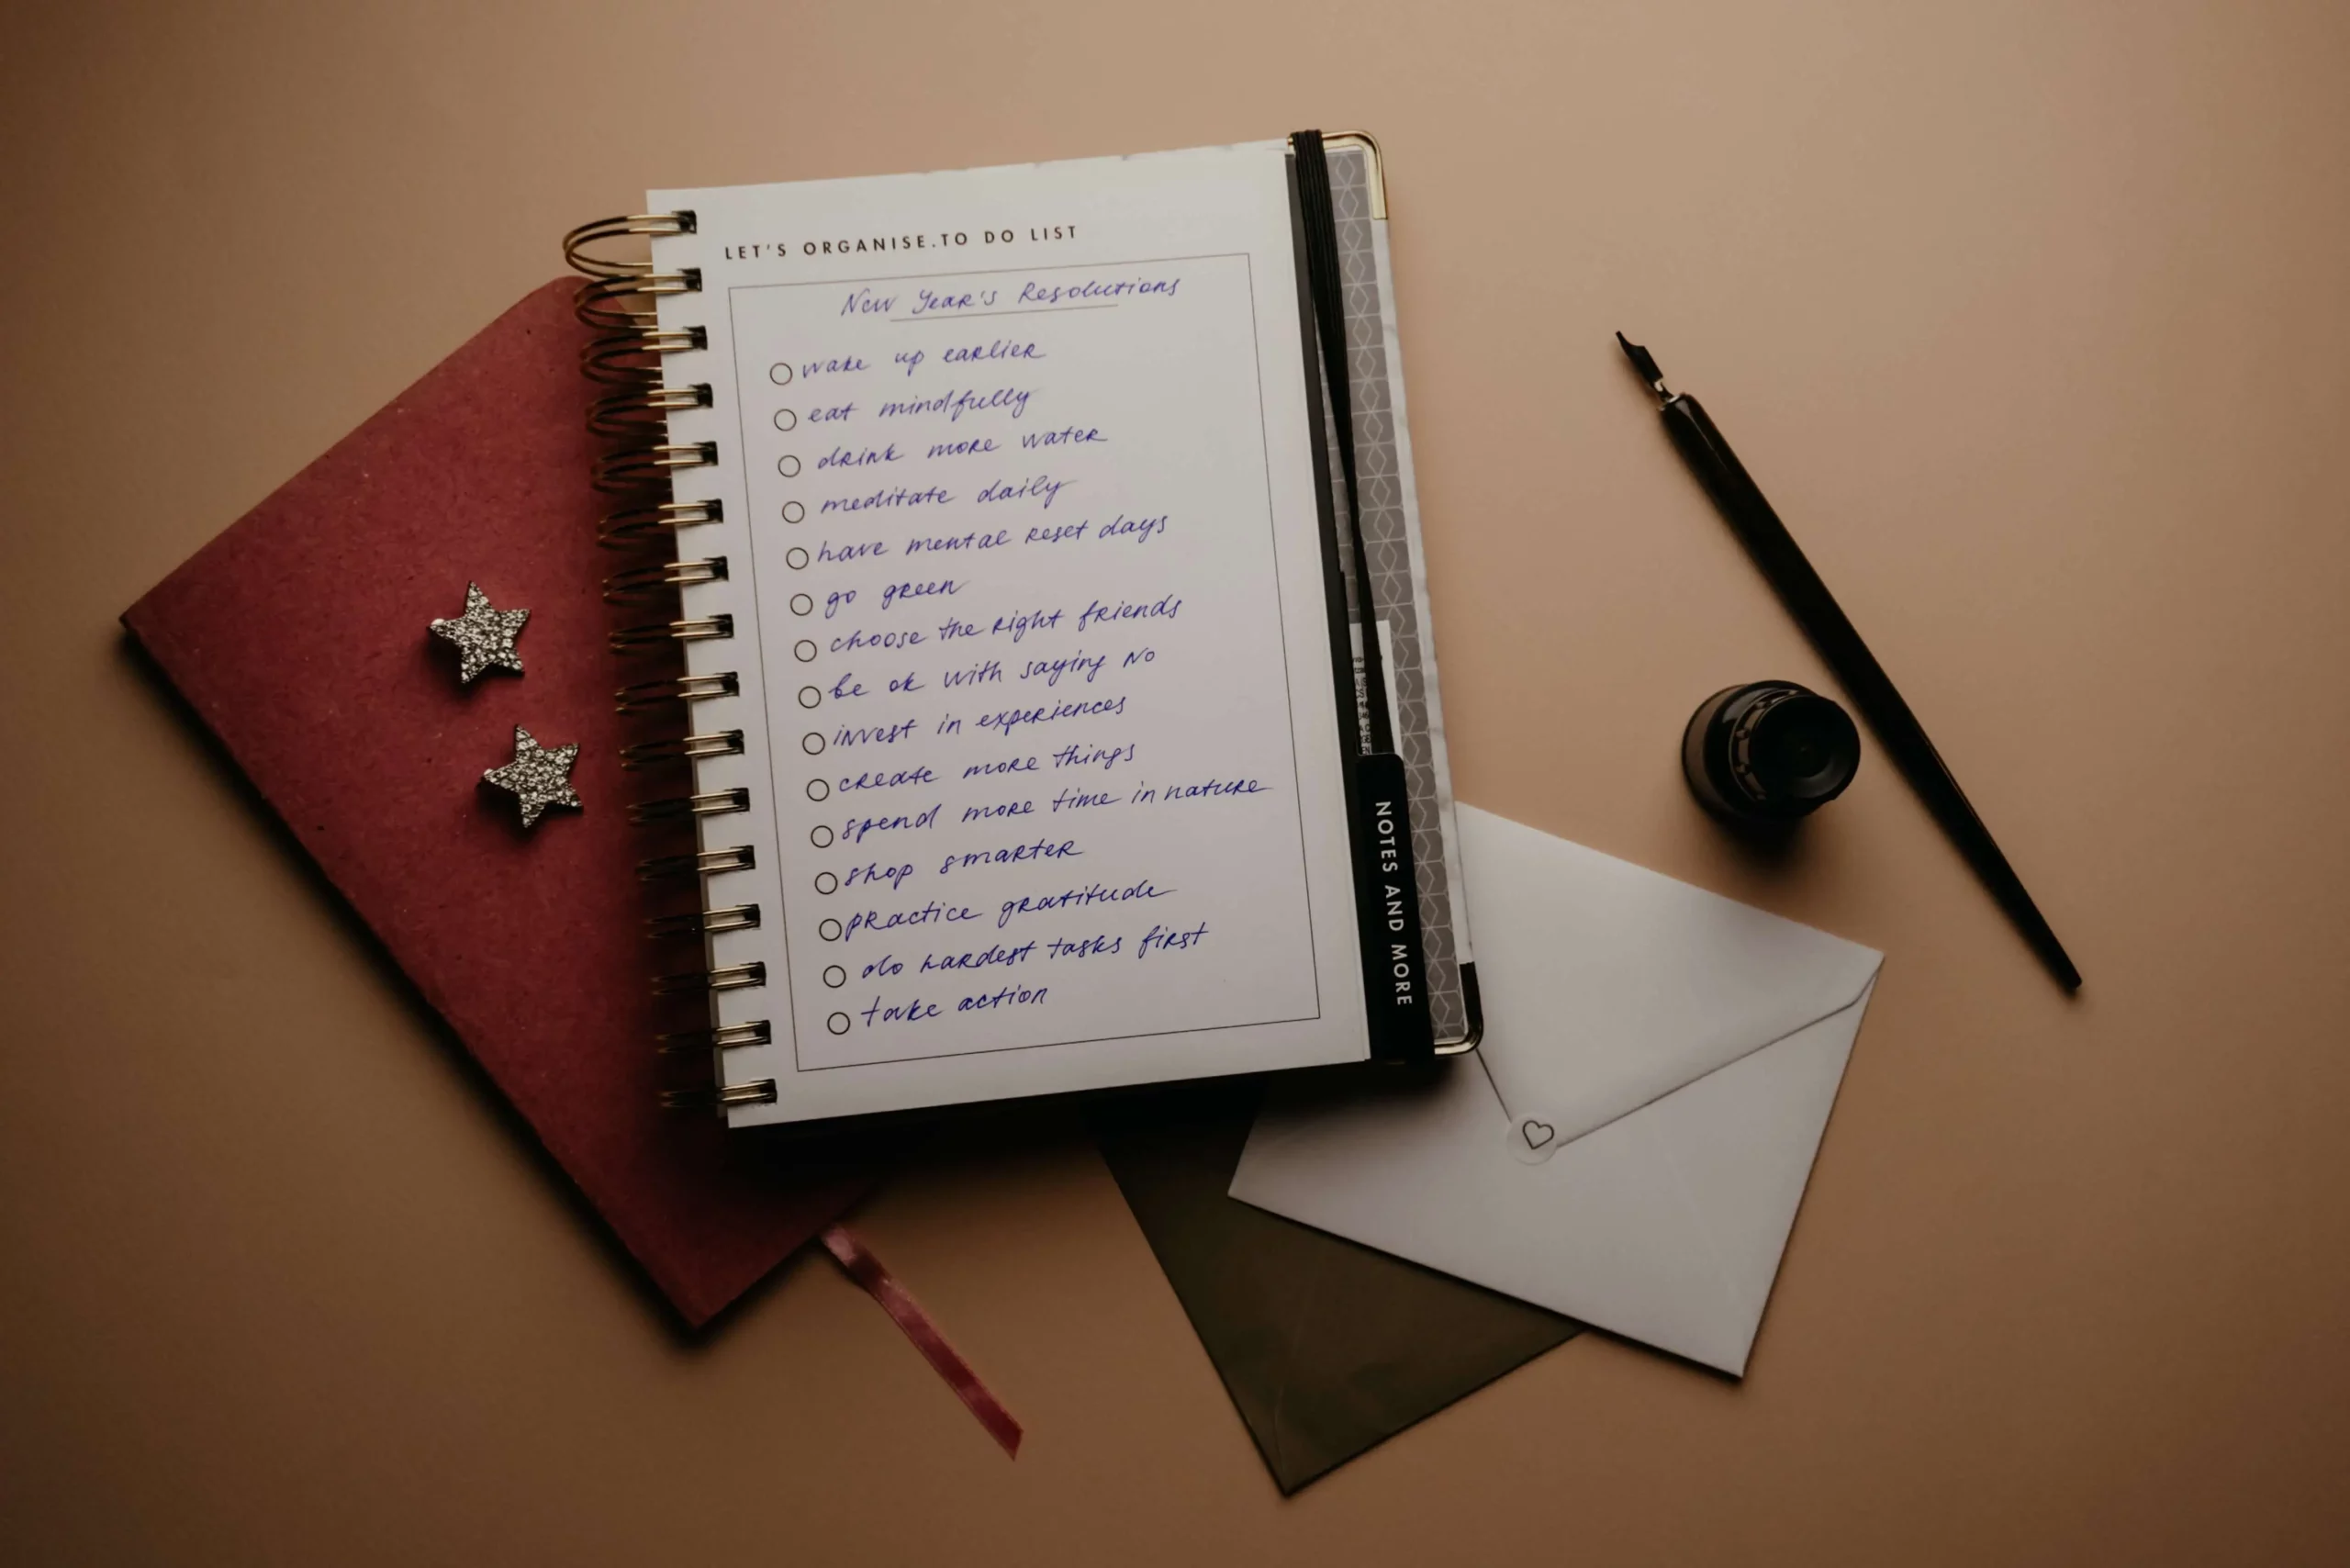 List of New Year Resolutions with Action Plan